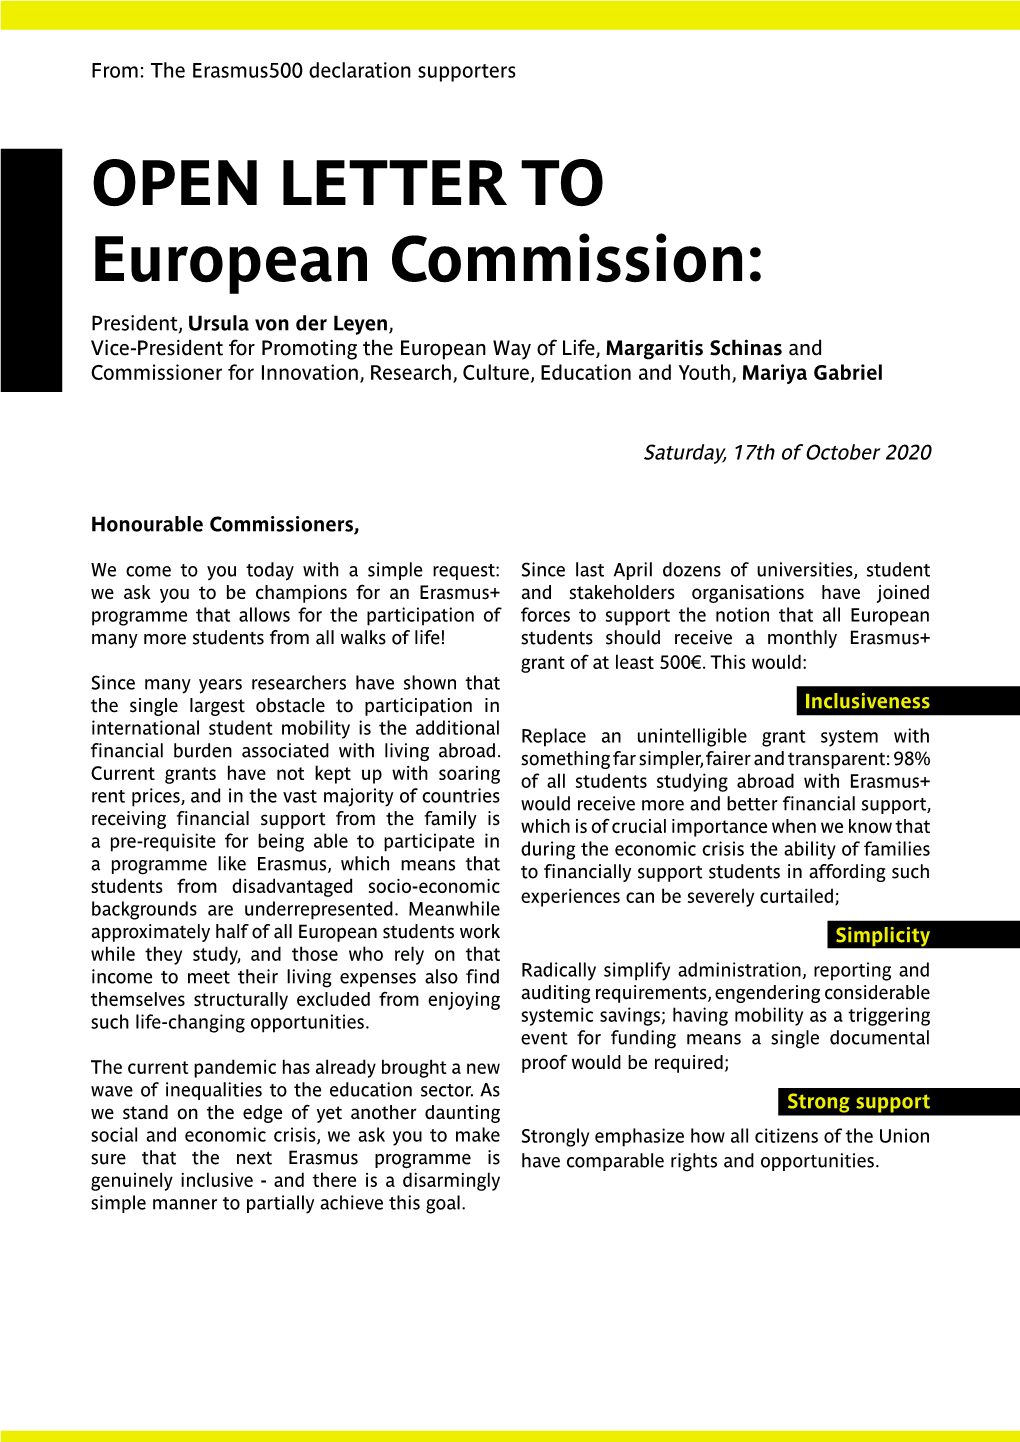 OPEN LETTER to European Commission